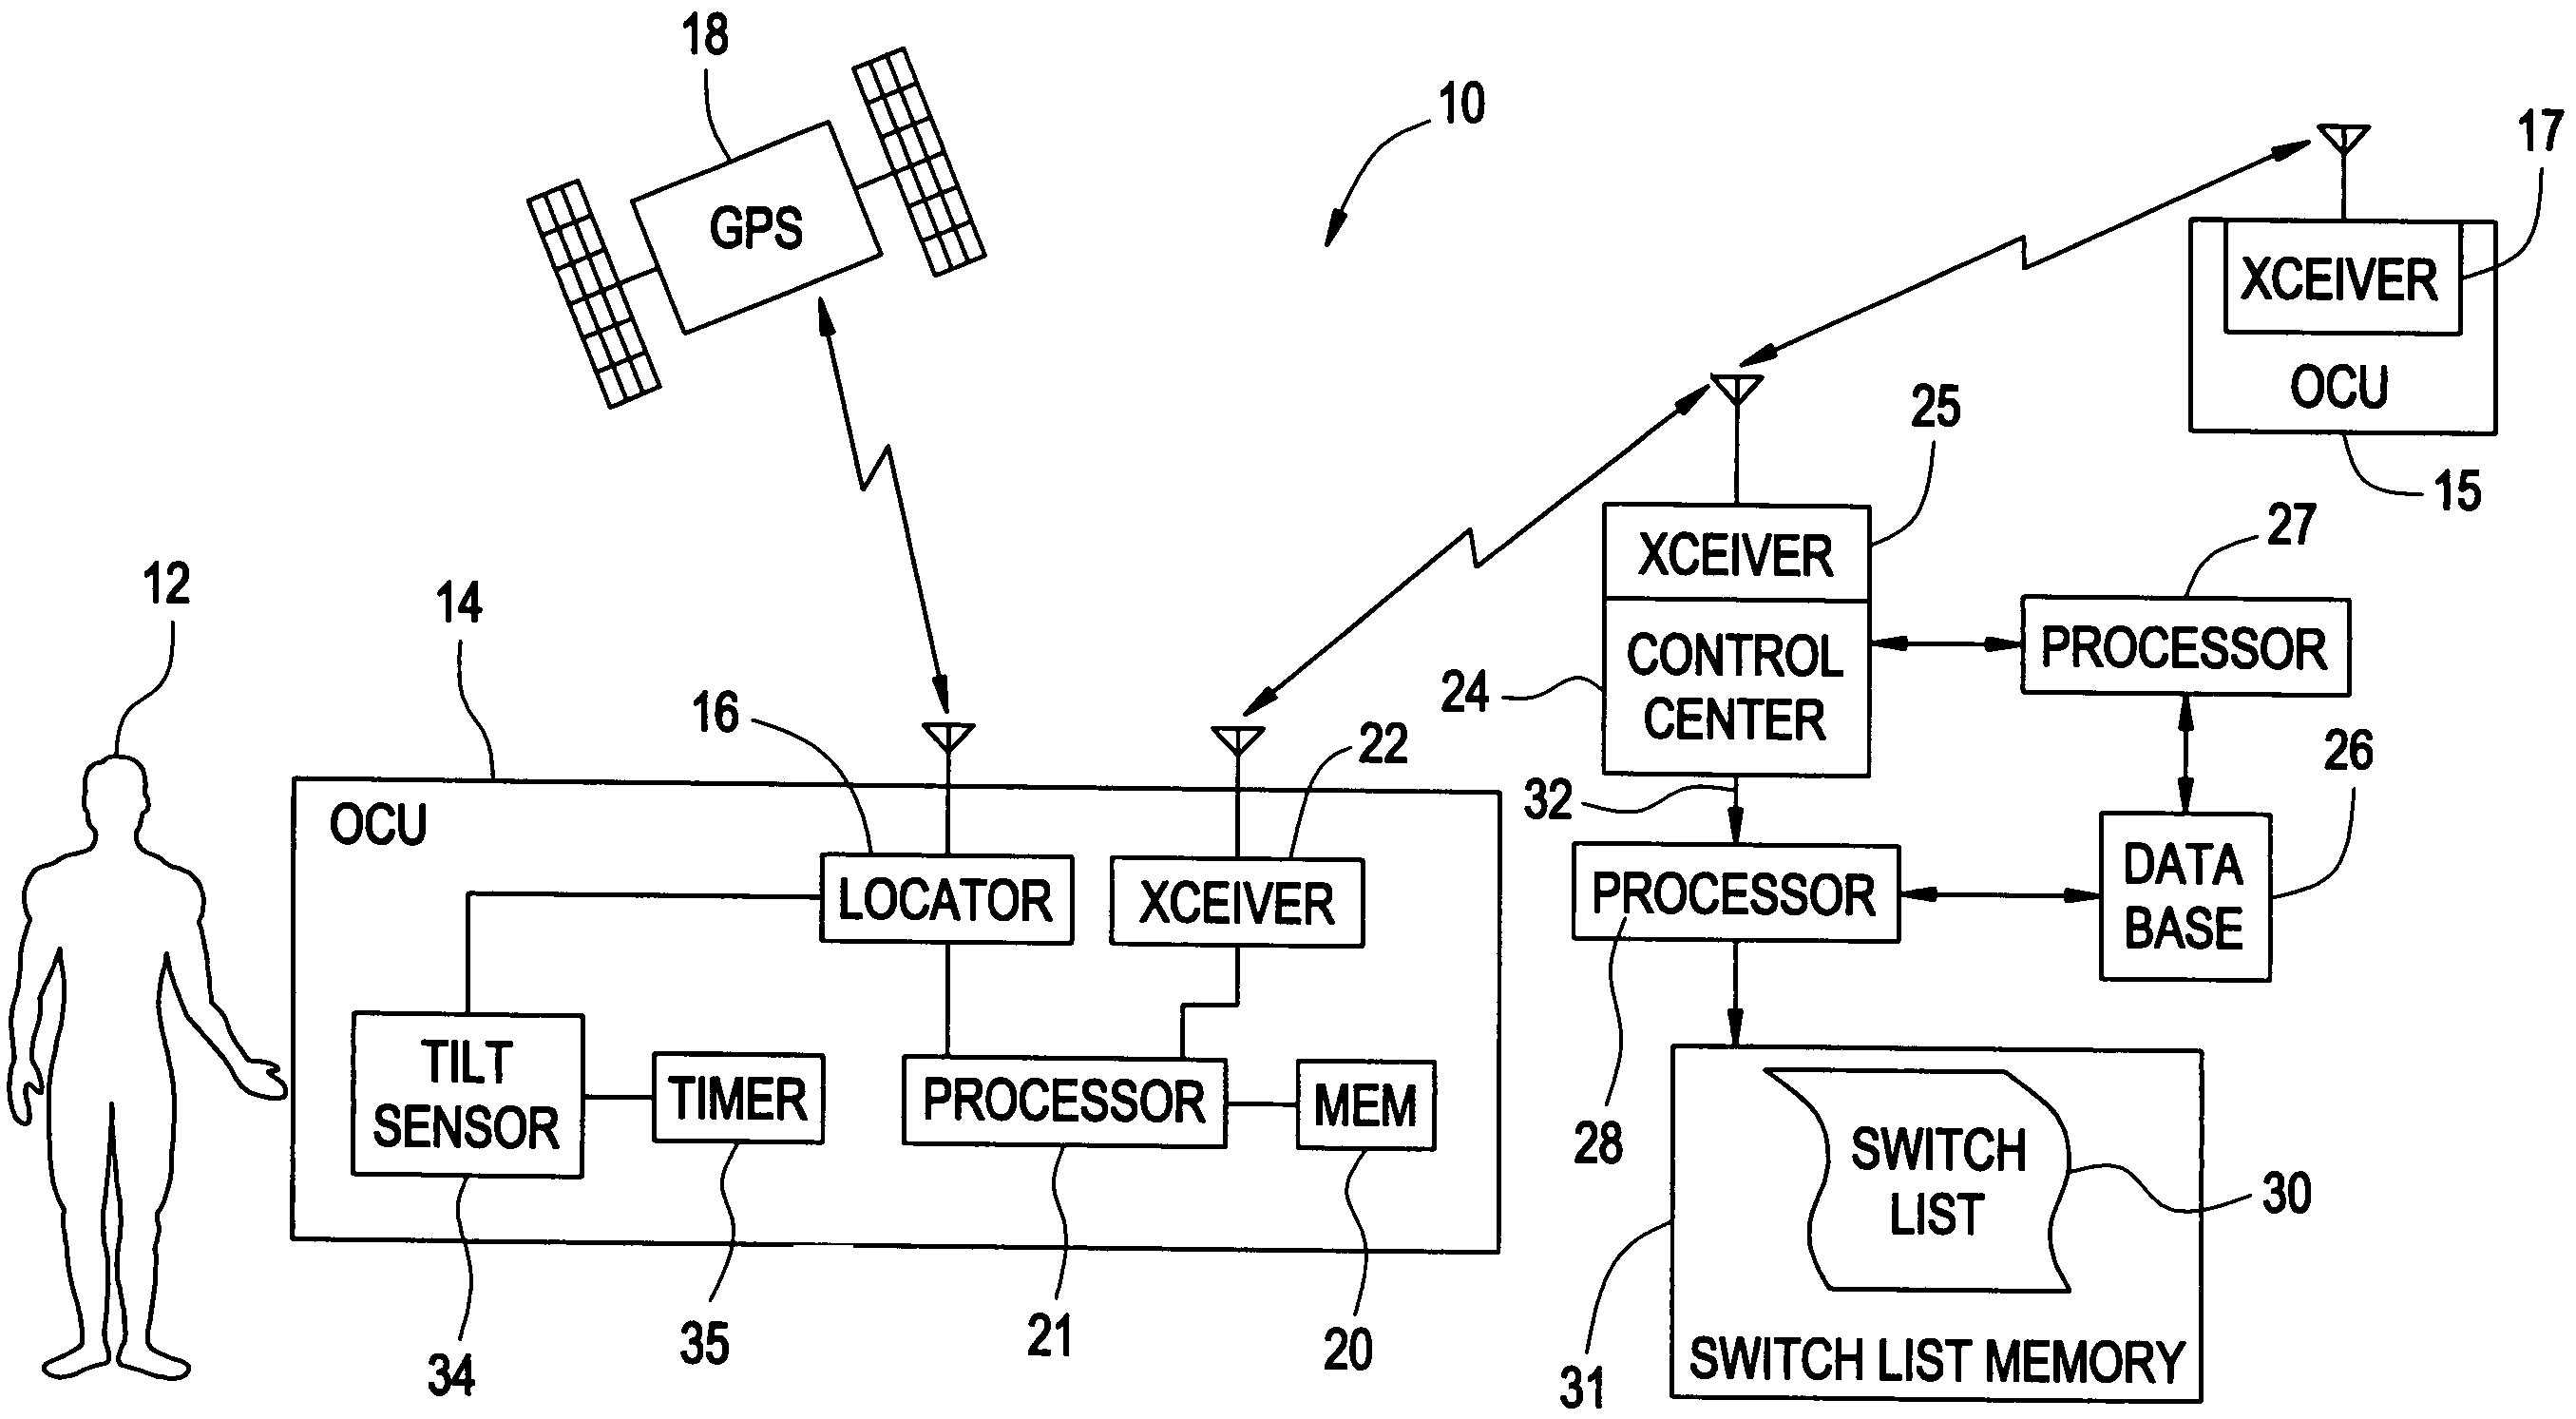 Operator location tracking for remote control rail yard switching